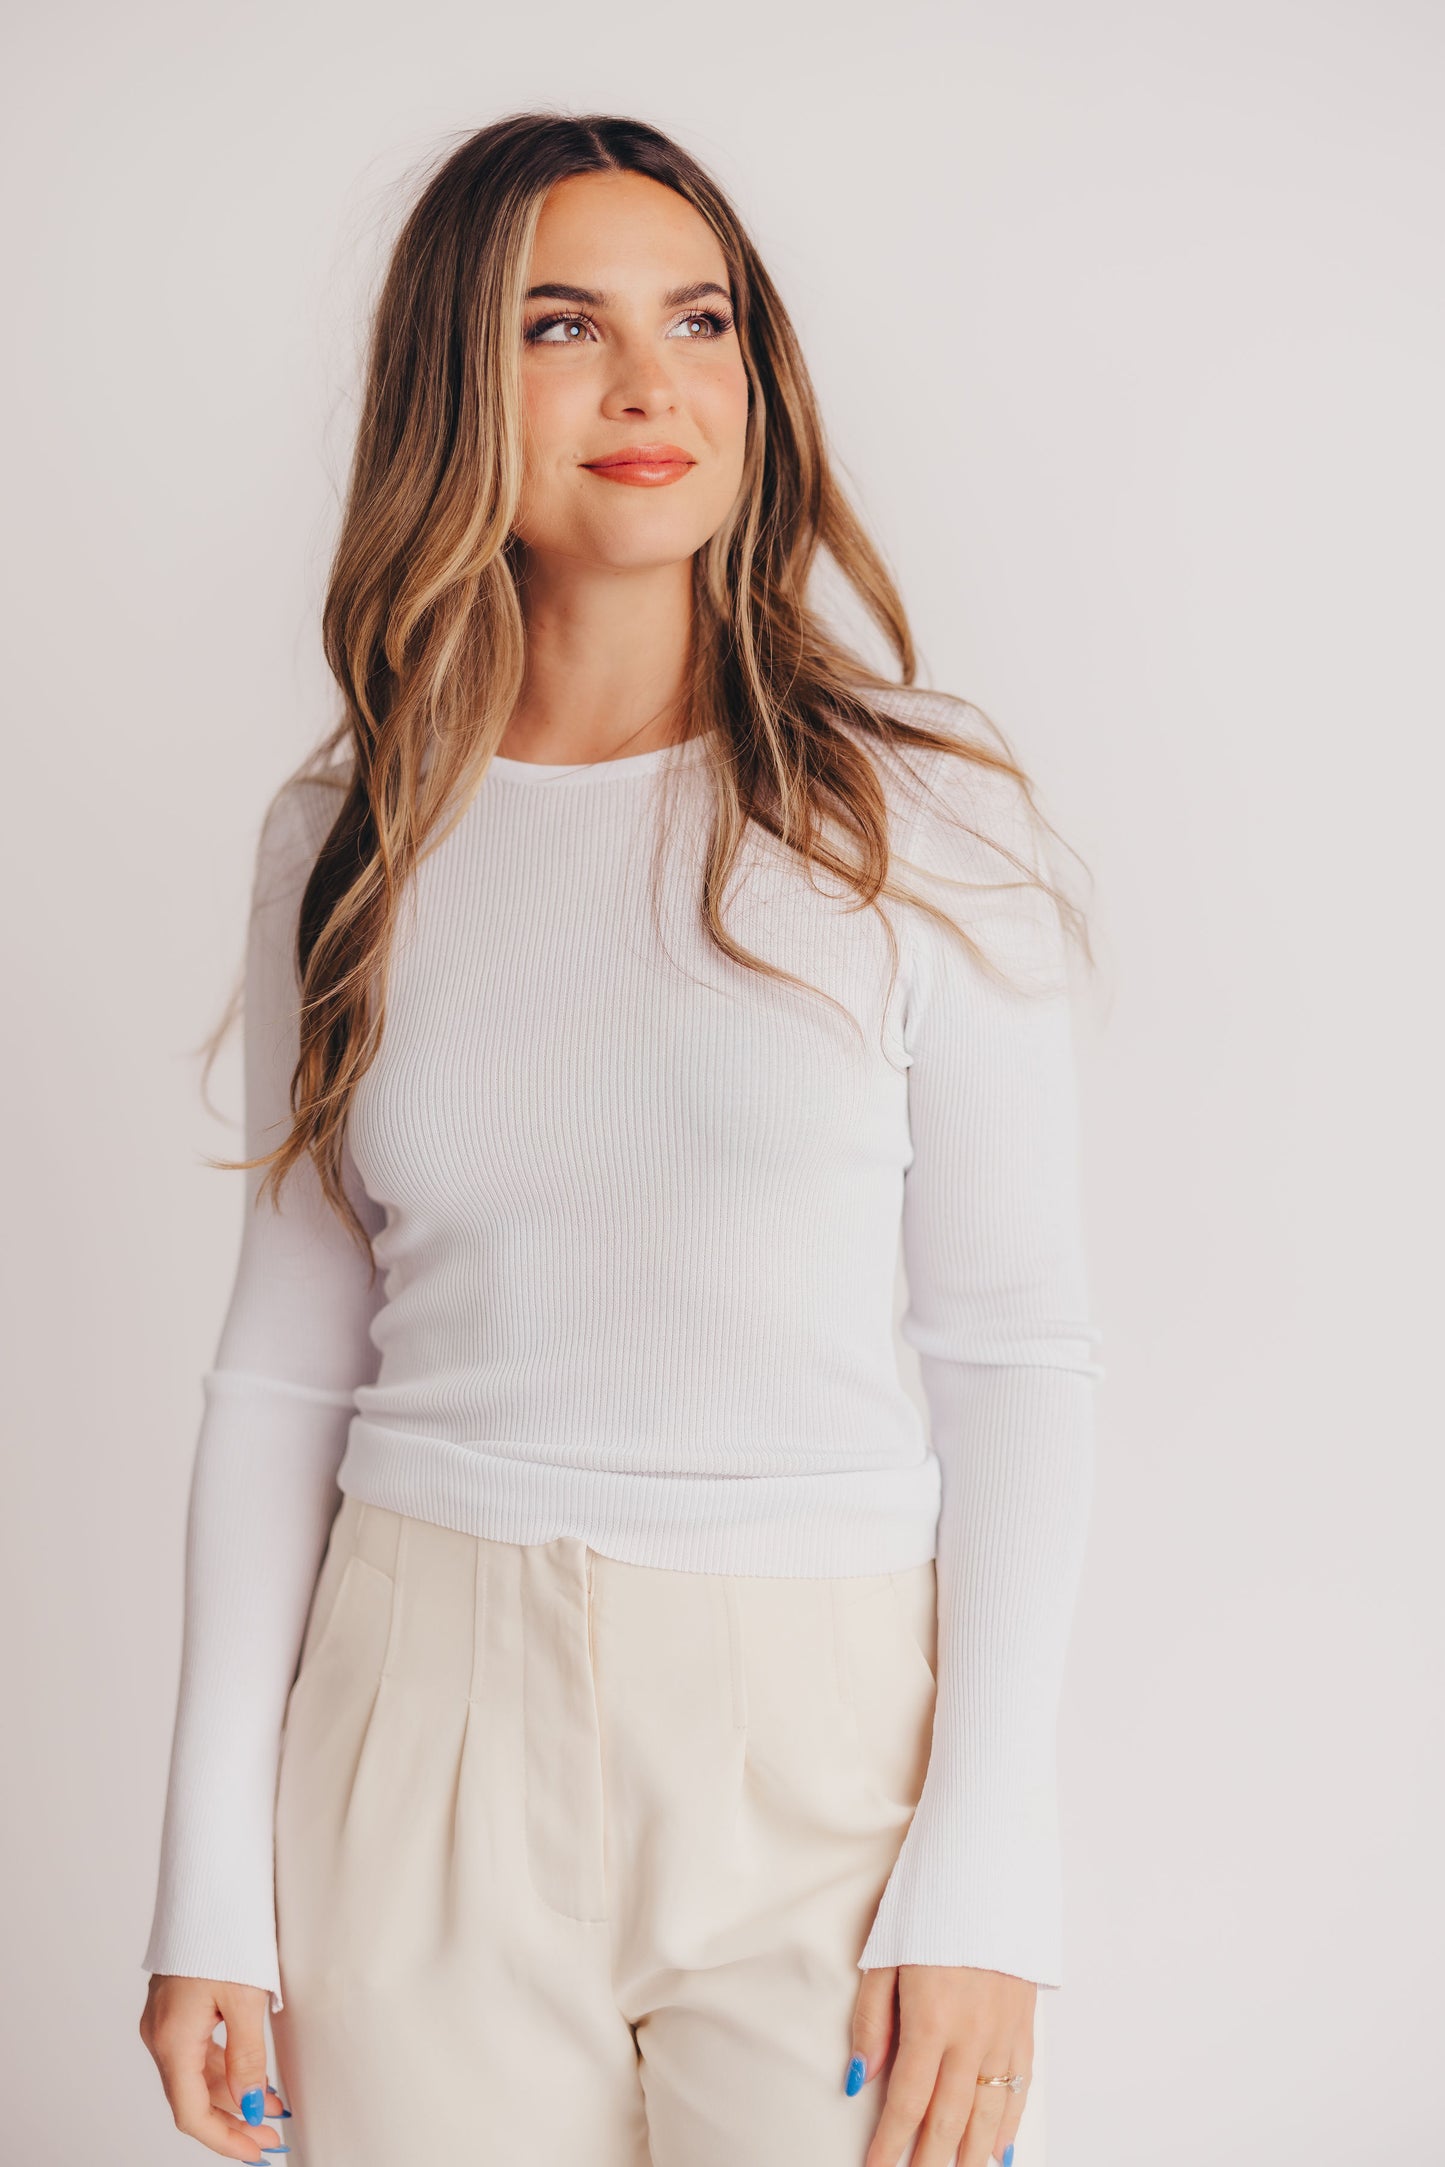 Marie Knit Top in White